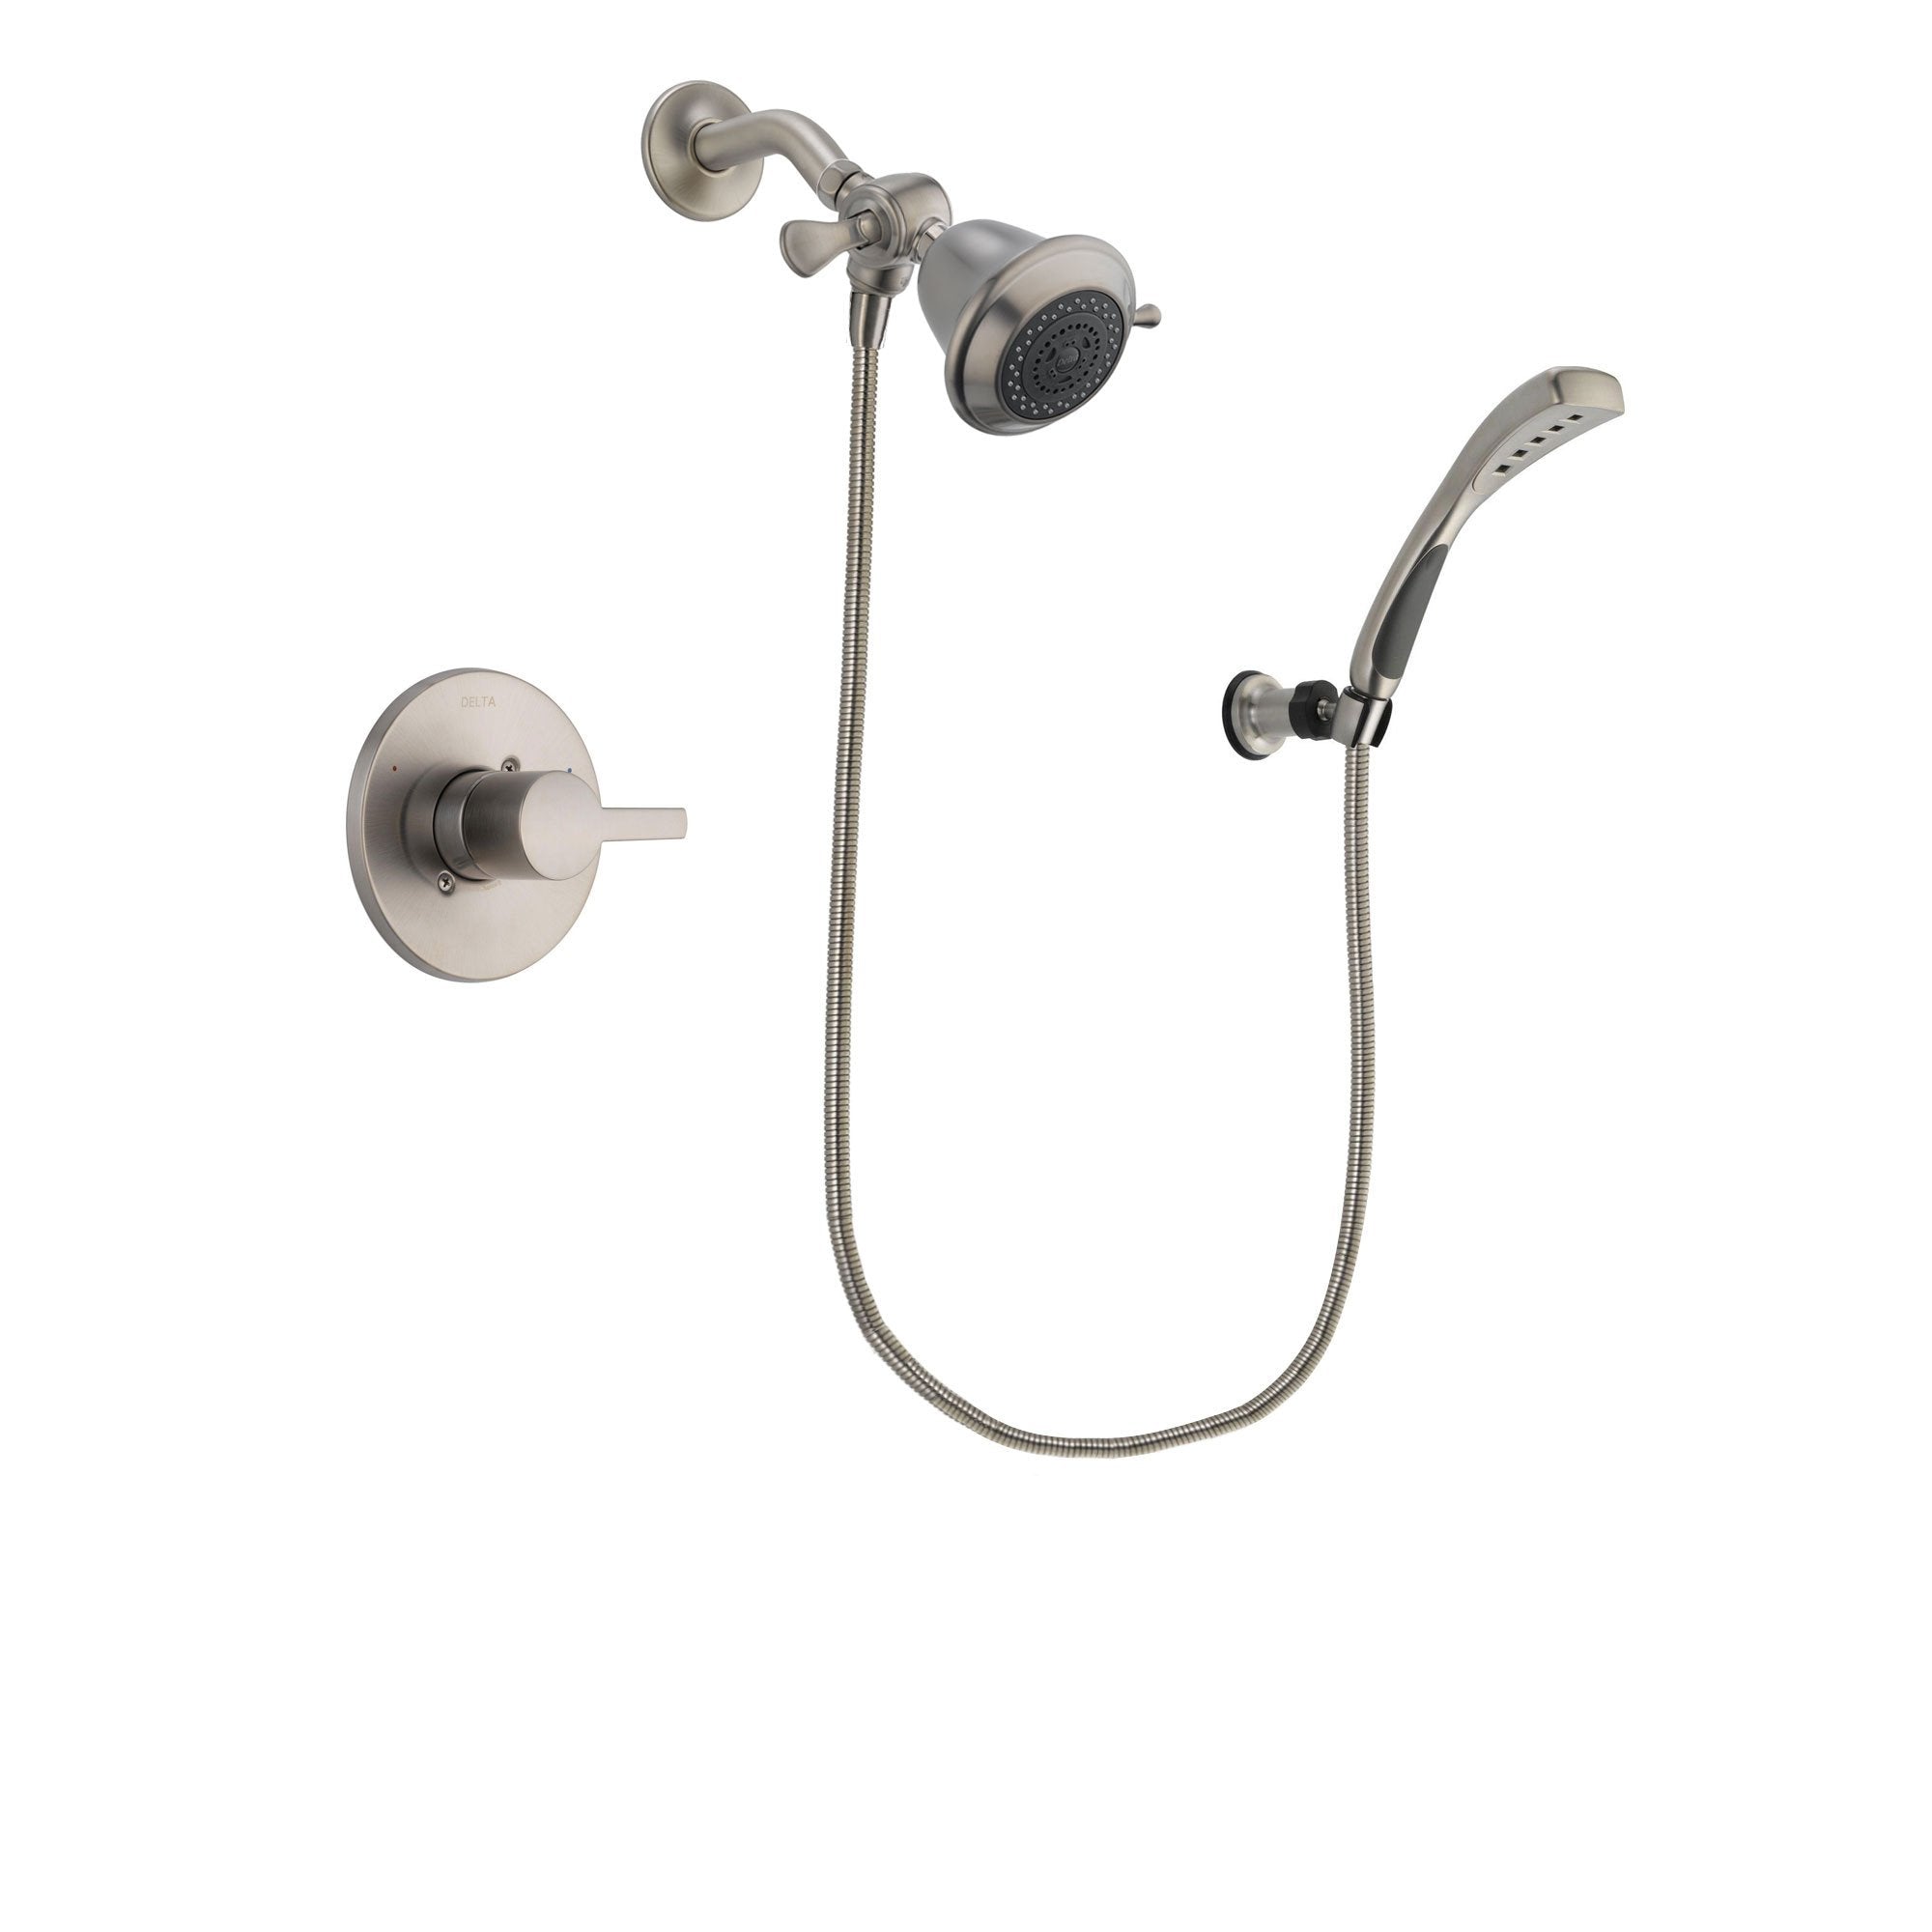 Delta Compel Stainless Steel Finish Shower Faucet System Package with Shower Head and Wall Mounted Handshower Includes Rough-in Valve DSP1800V